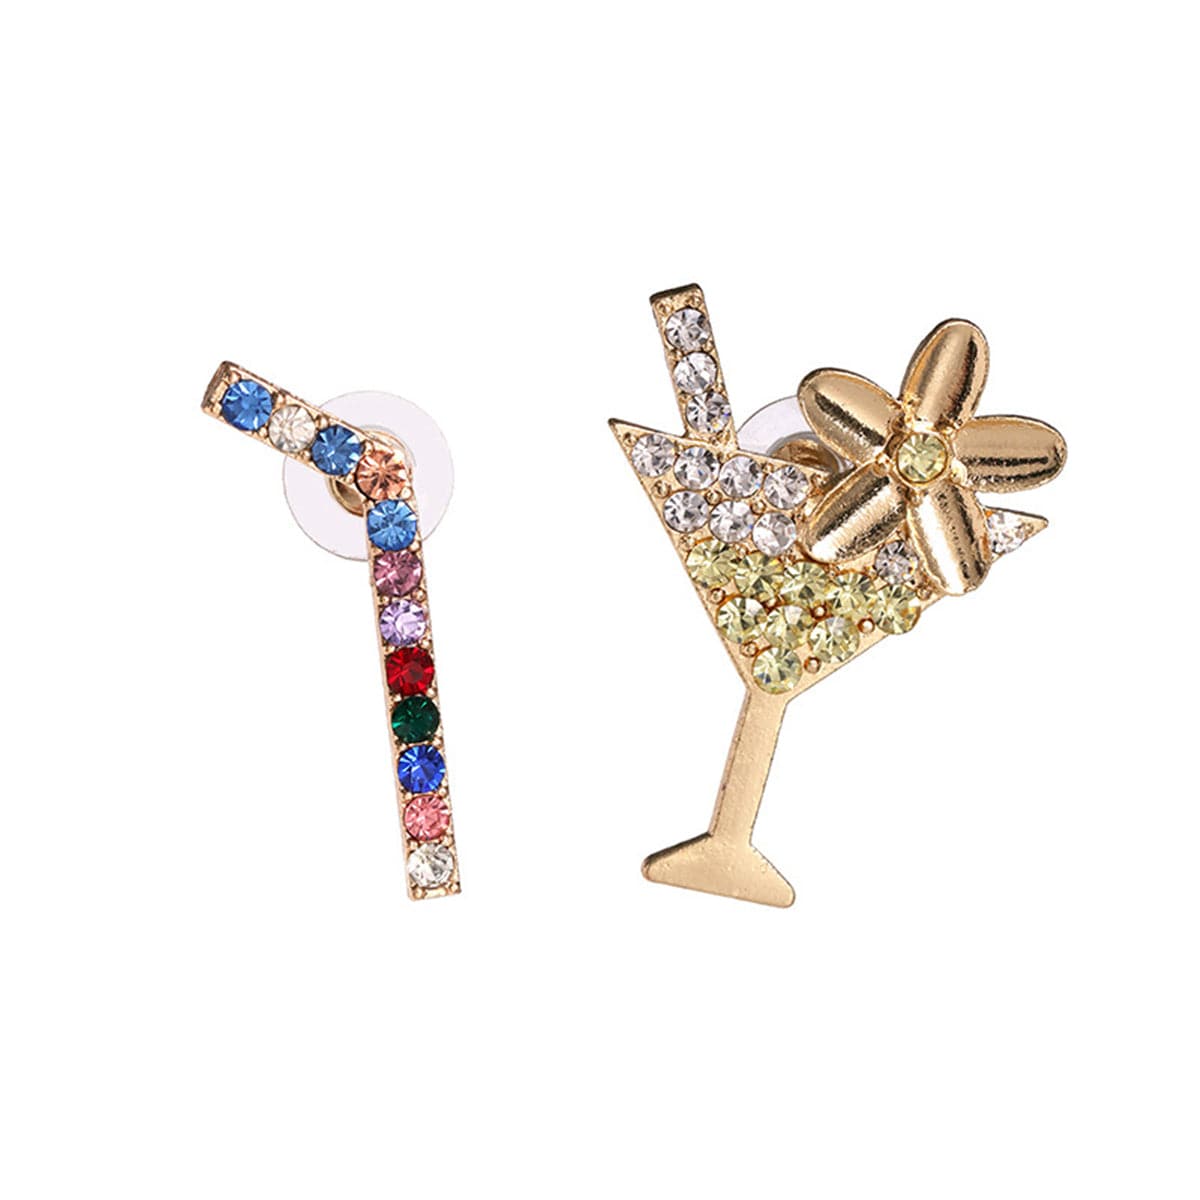 Multicolor Cubic Zirconia & 18K Gold-Plated Martini & Straw Stud Earrings